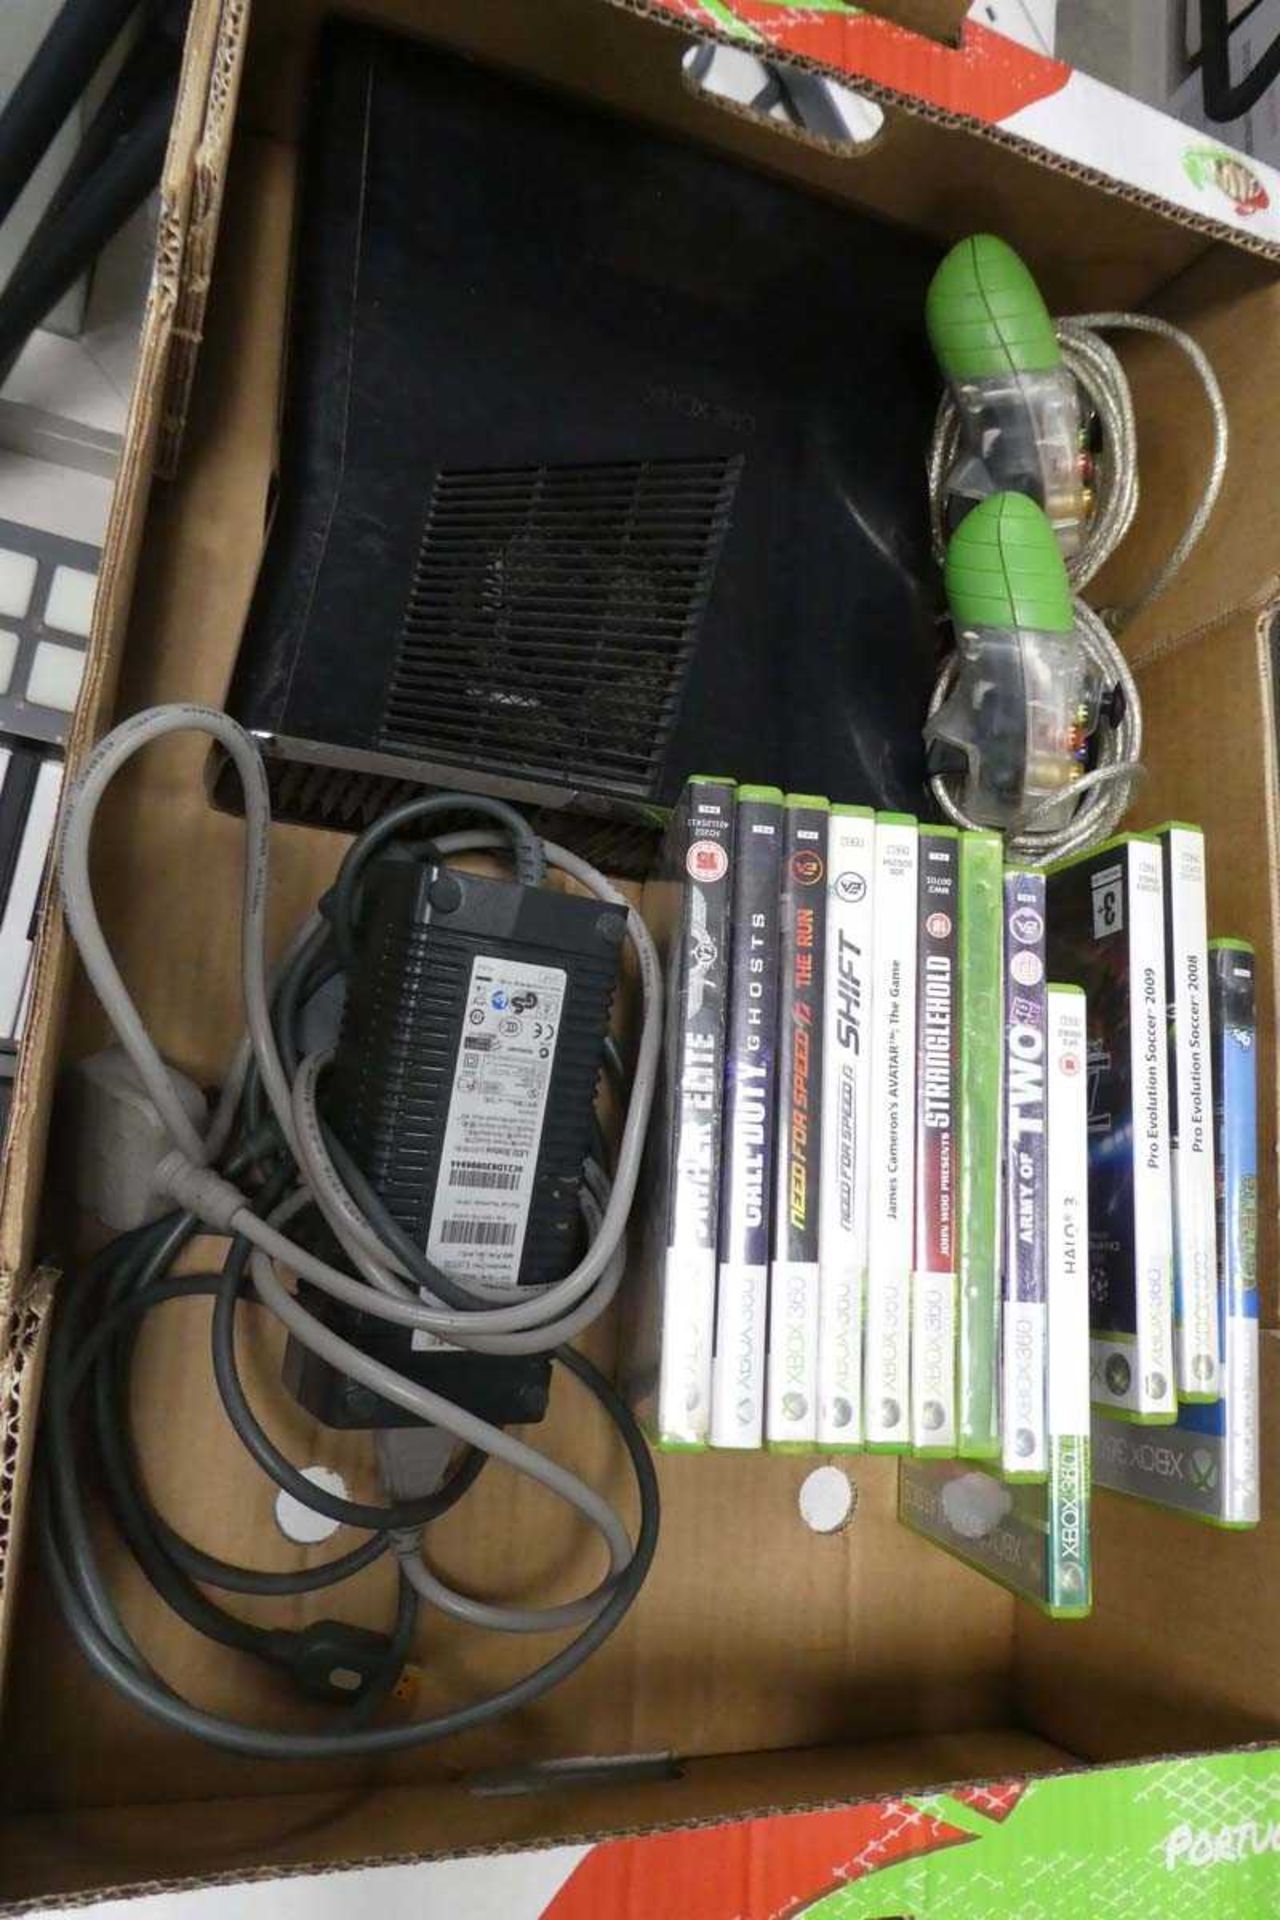 X Box 360 console with various games and power supply and controllers